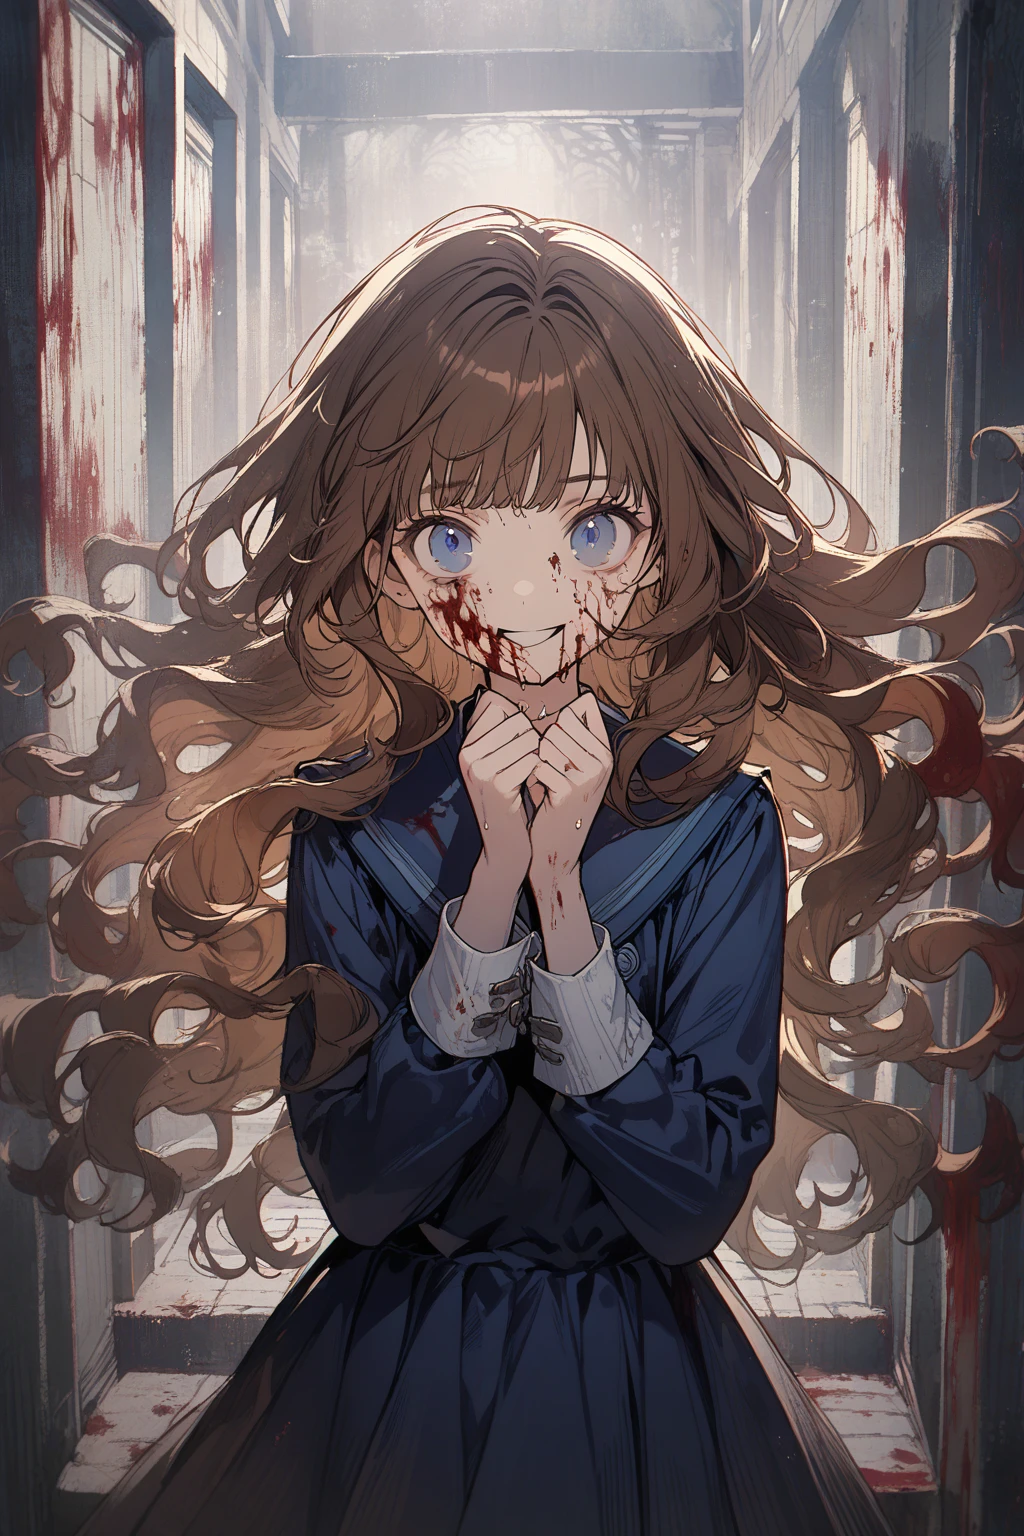 1 girl, CuteStyle, upper body, blue eyes, brown hair, long hair with bangs, flowing hair, standing in the stairwell in the entrance, white walls, iron railings, dressed in a dark blue school dress, long sleeves, white cuffs, face in blood, sweat on the face, hands in blood, walls in blood, looks at the viewer, scared look, scared smile, detailed, beautiful, atmospheric, gentle tones